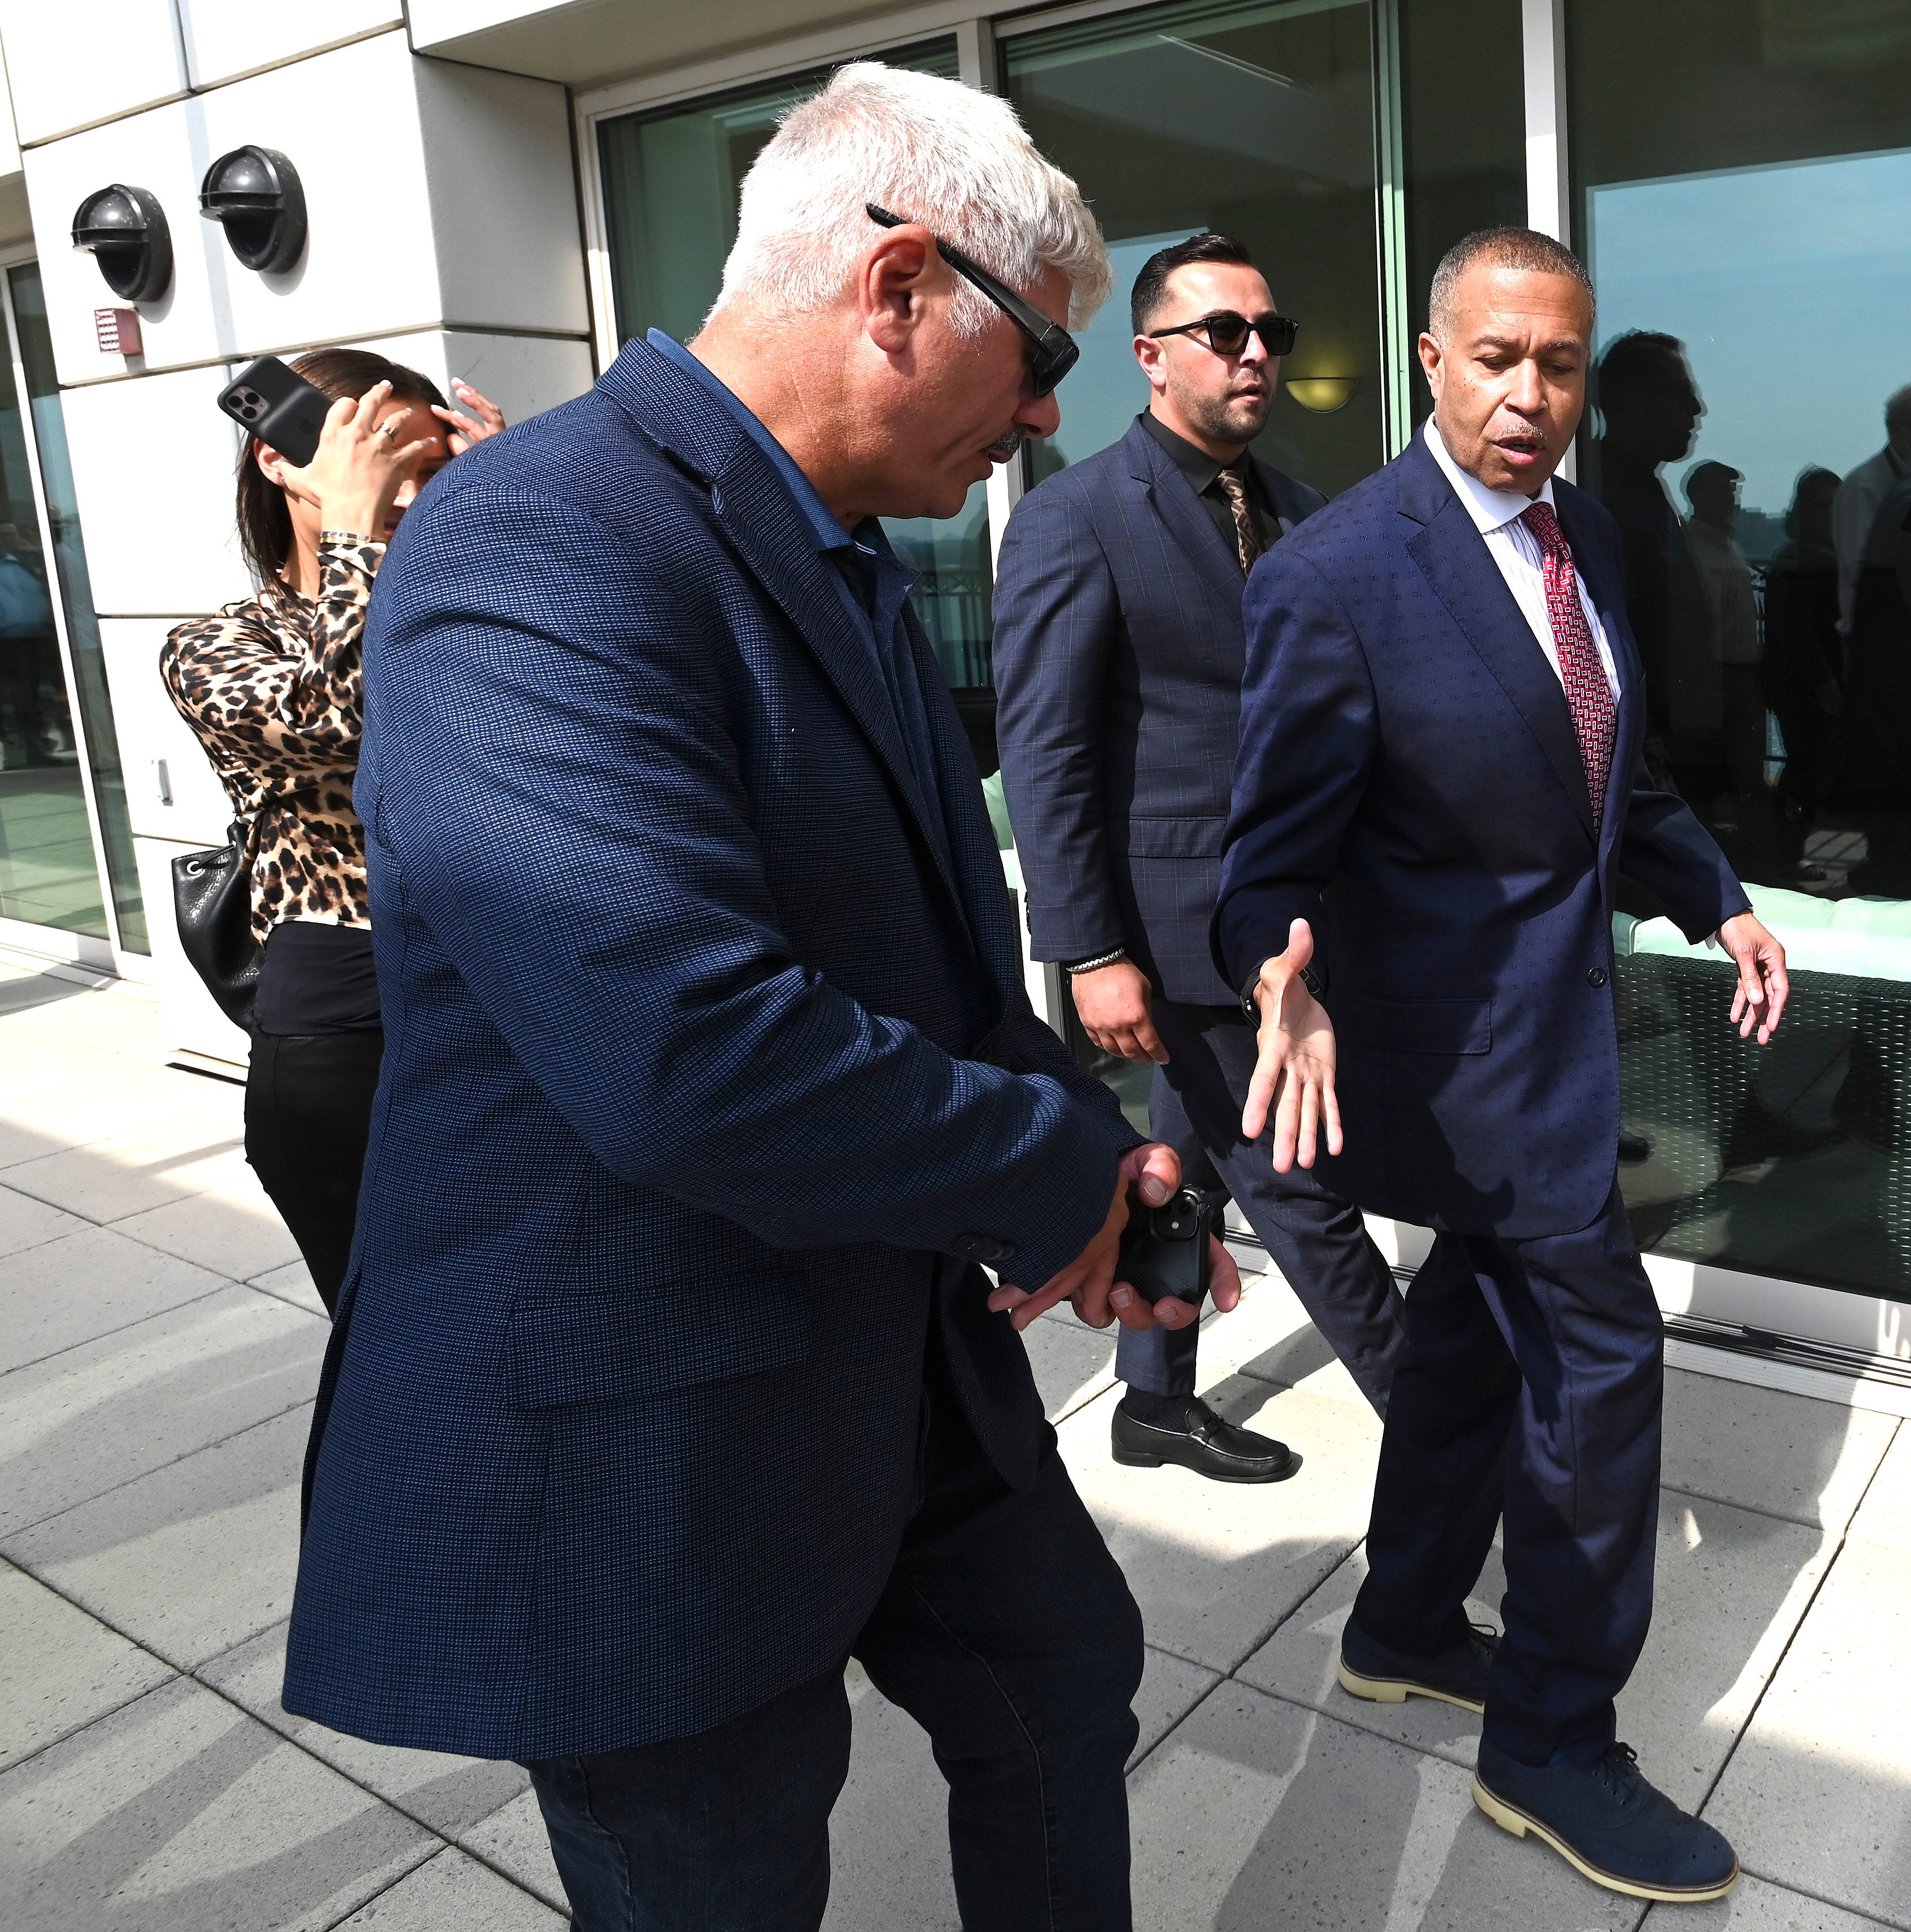 Former Detroit Police Chief James Craig, right, shakes hands with supporters after announcing his Republican candidacy for Michigan governor on the eighth floor of the Icon building, formerly the UAW-GM Center for Human Resources, in Detroit, Tuesday afternoon, September 14, 2021.